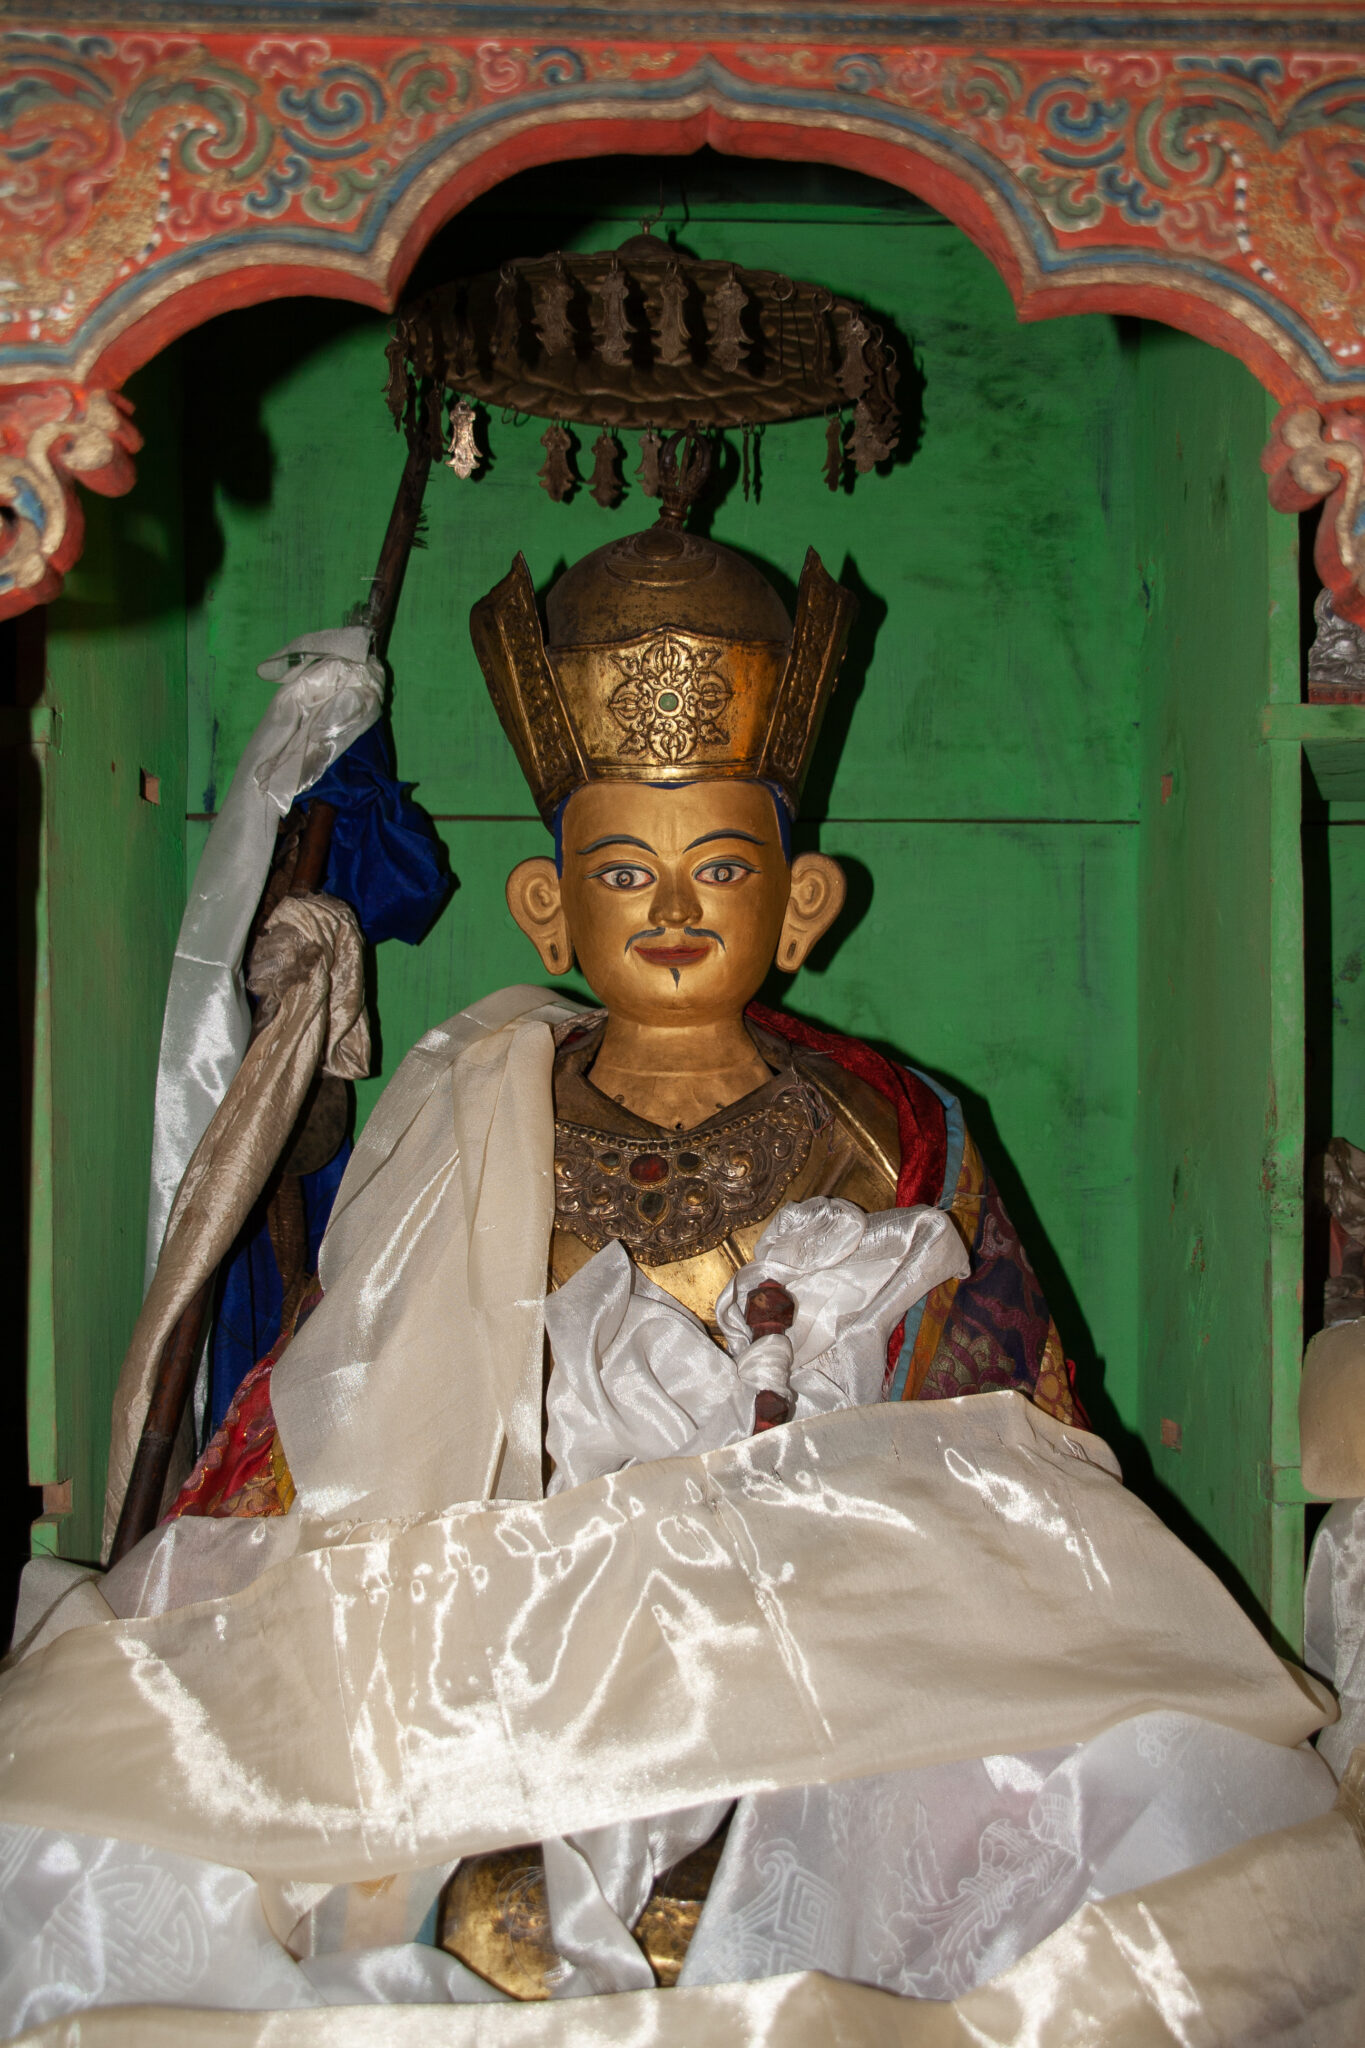 Seated statue wearing tall crown; adorned with scarves and situated in green niche behind painted red arch